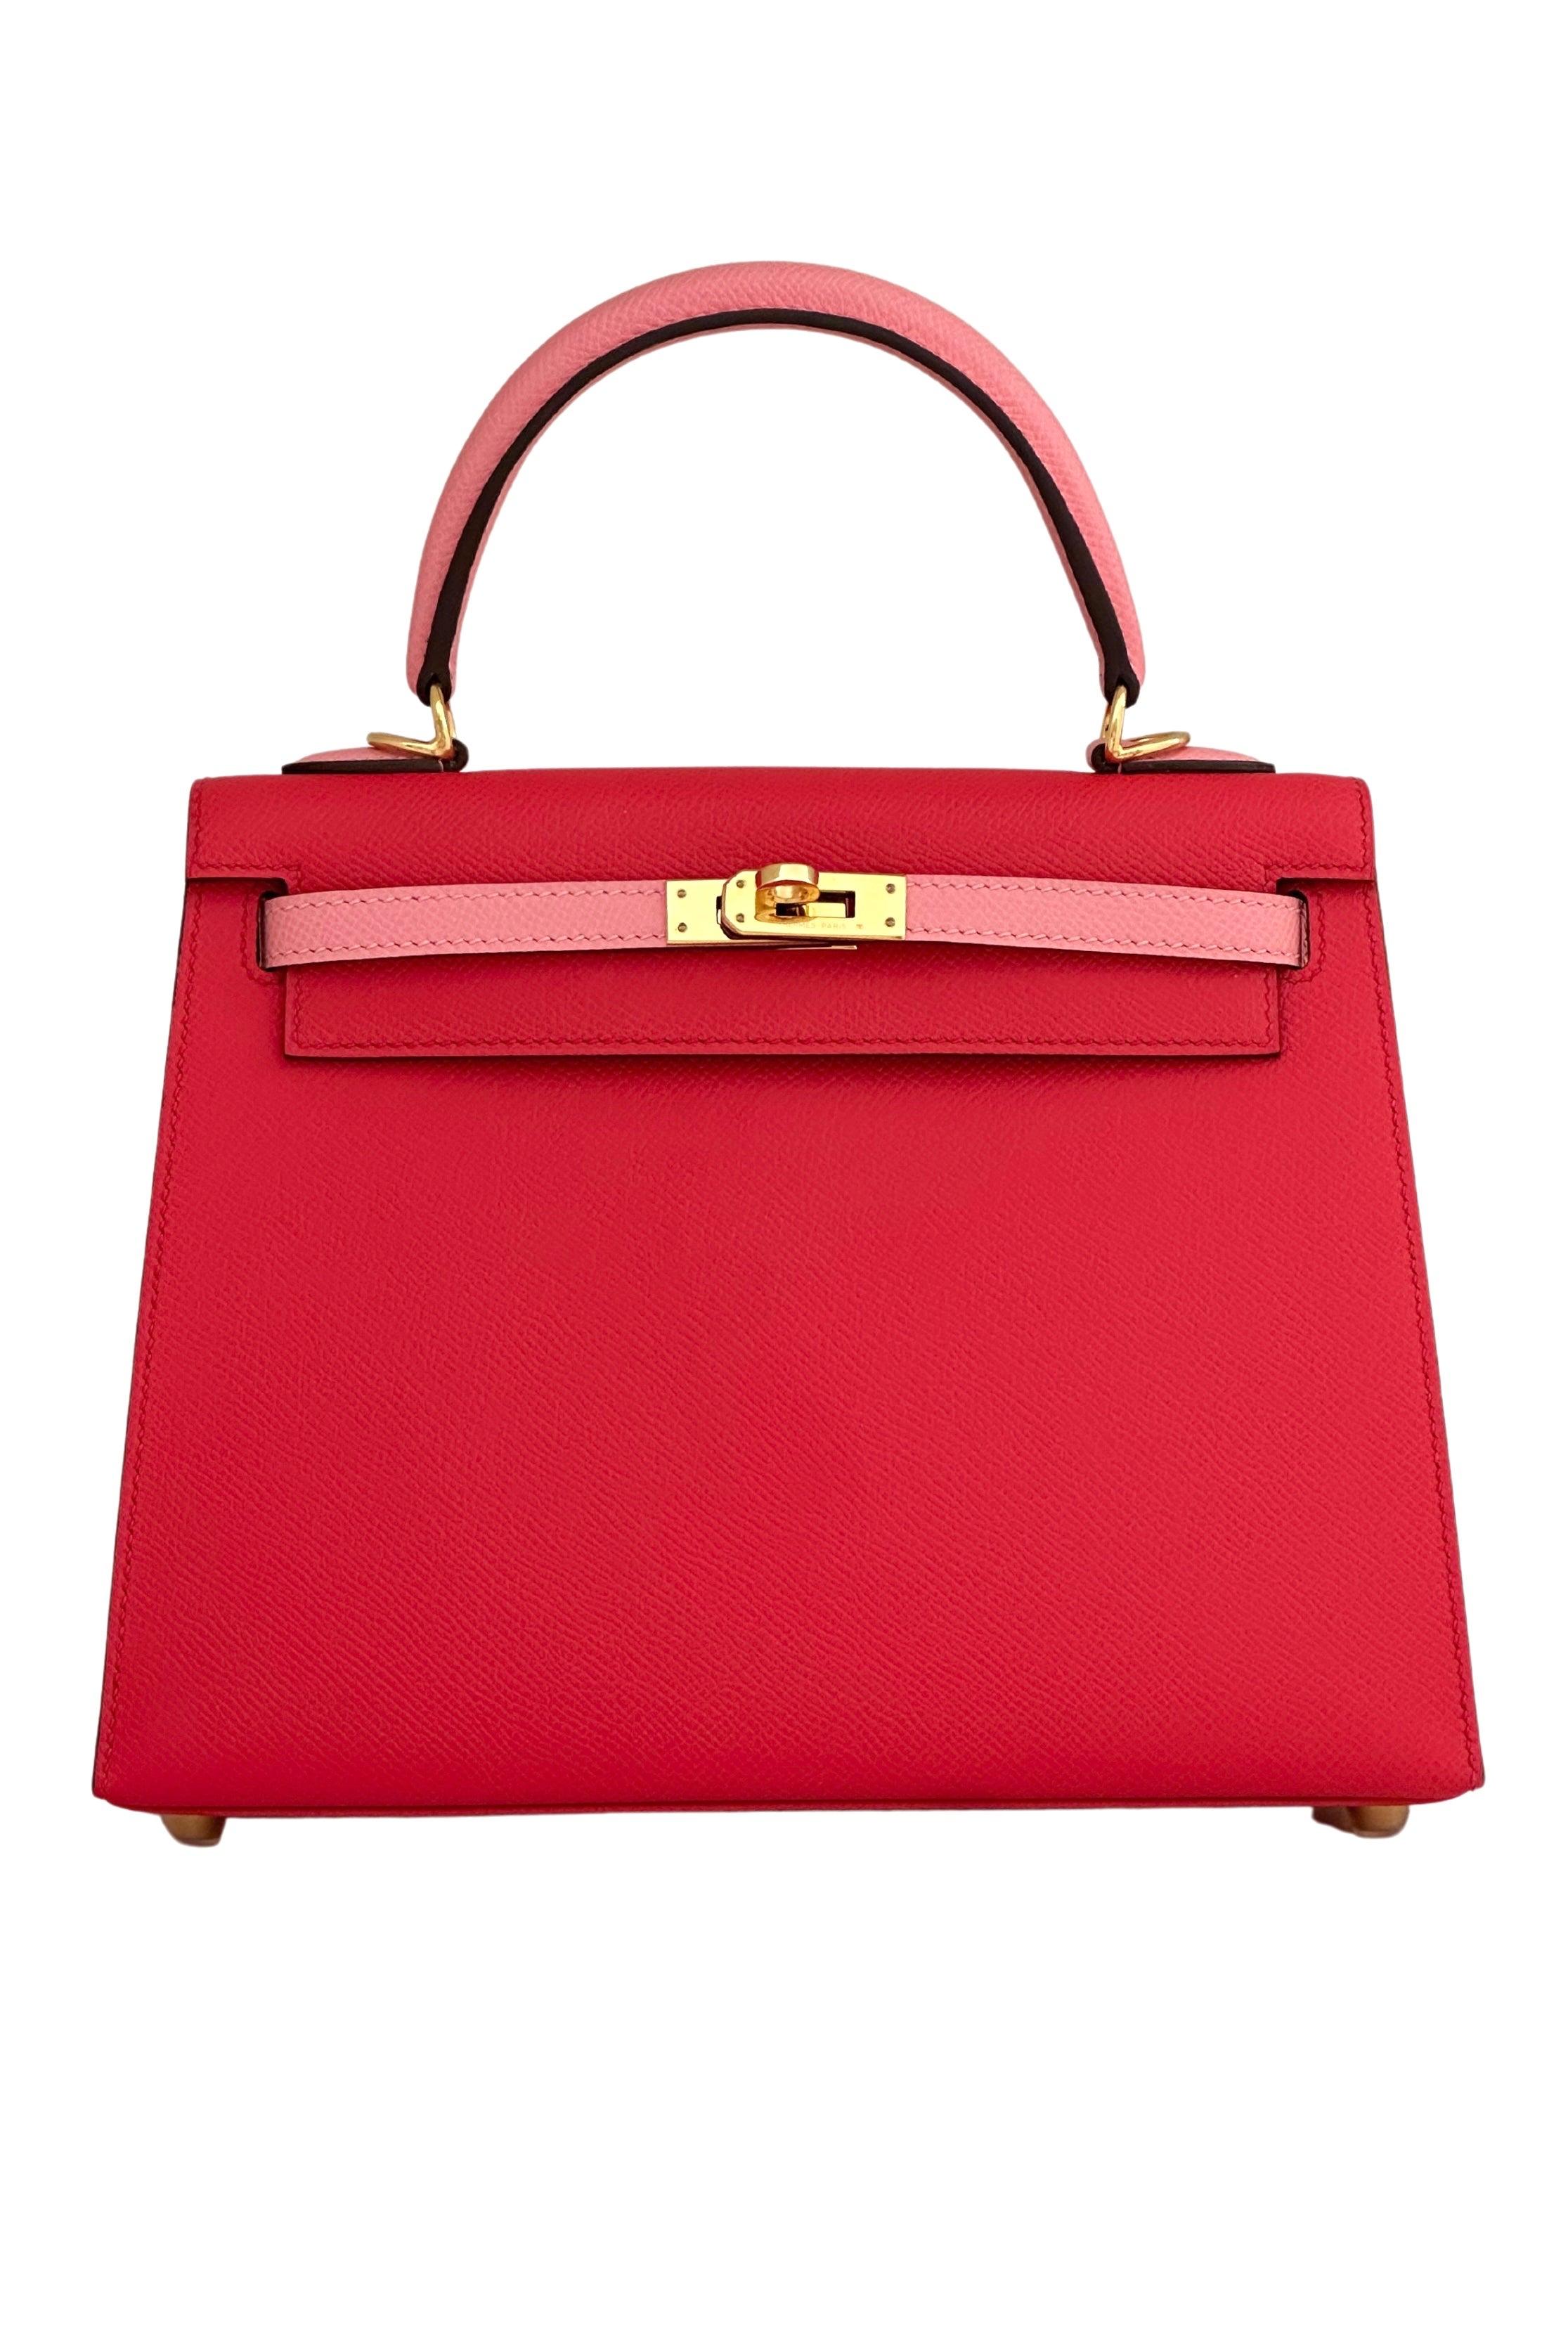 A custom Hermès piece, this gorgeous Kelly 25 bag bears the horseshoe symbol next to the Hermès stamp inside the bag, denoting a special order that is completely unique and one off. Made of Epsom leather in the shades S5 Rouge Tomate + 1Q Rose